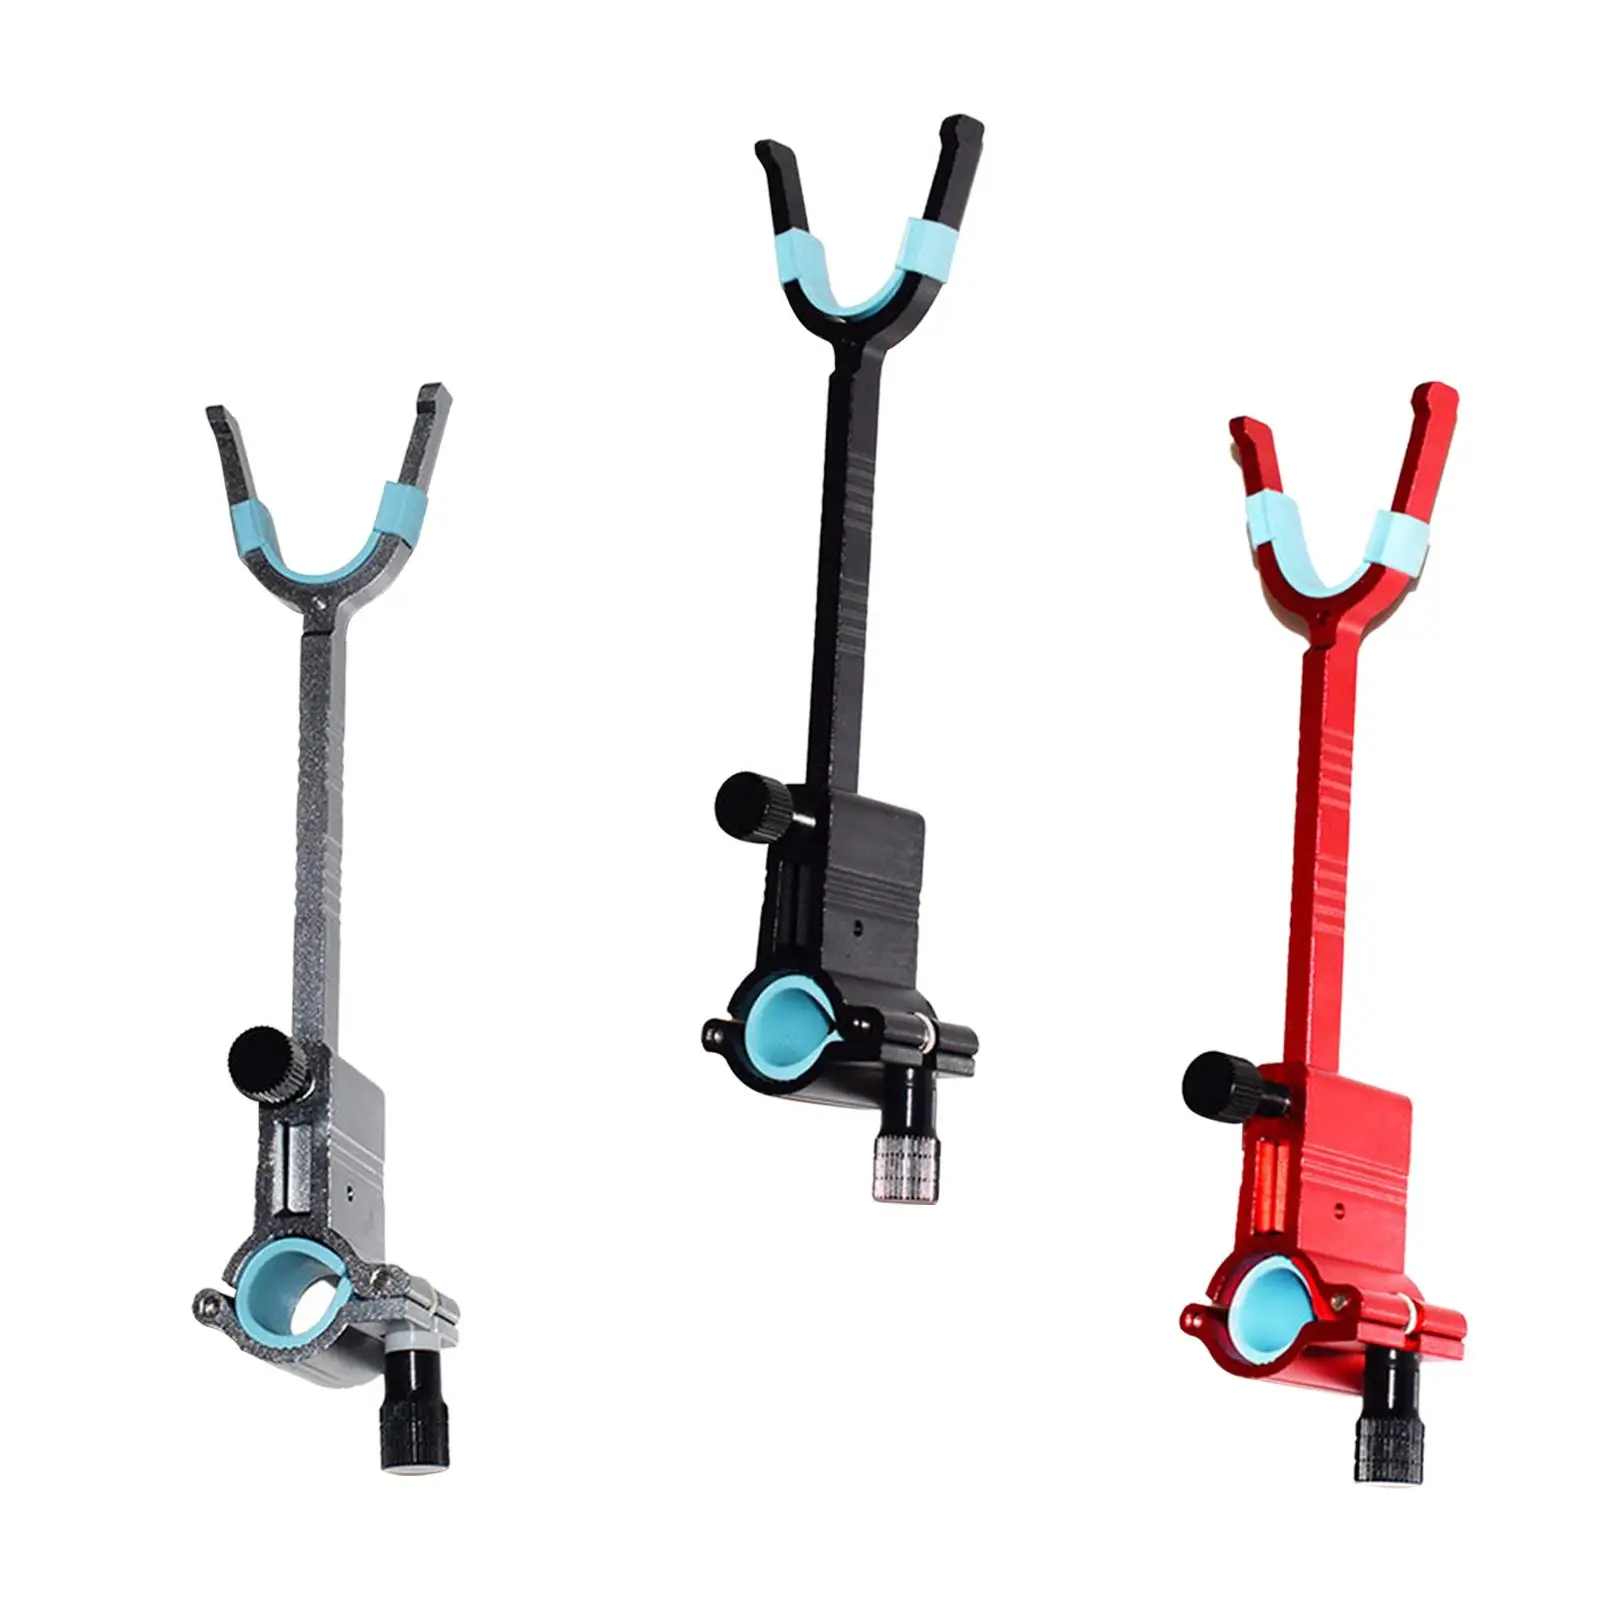 Rod Holders for Bank Fishing for Fishing Rod 20mm~27mm Stand Rod Device Fishing Pole Holder for Boat Lakes Fishing Tackle